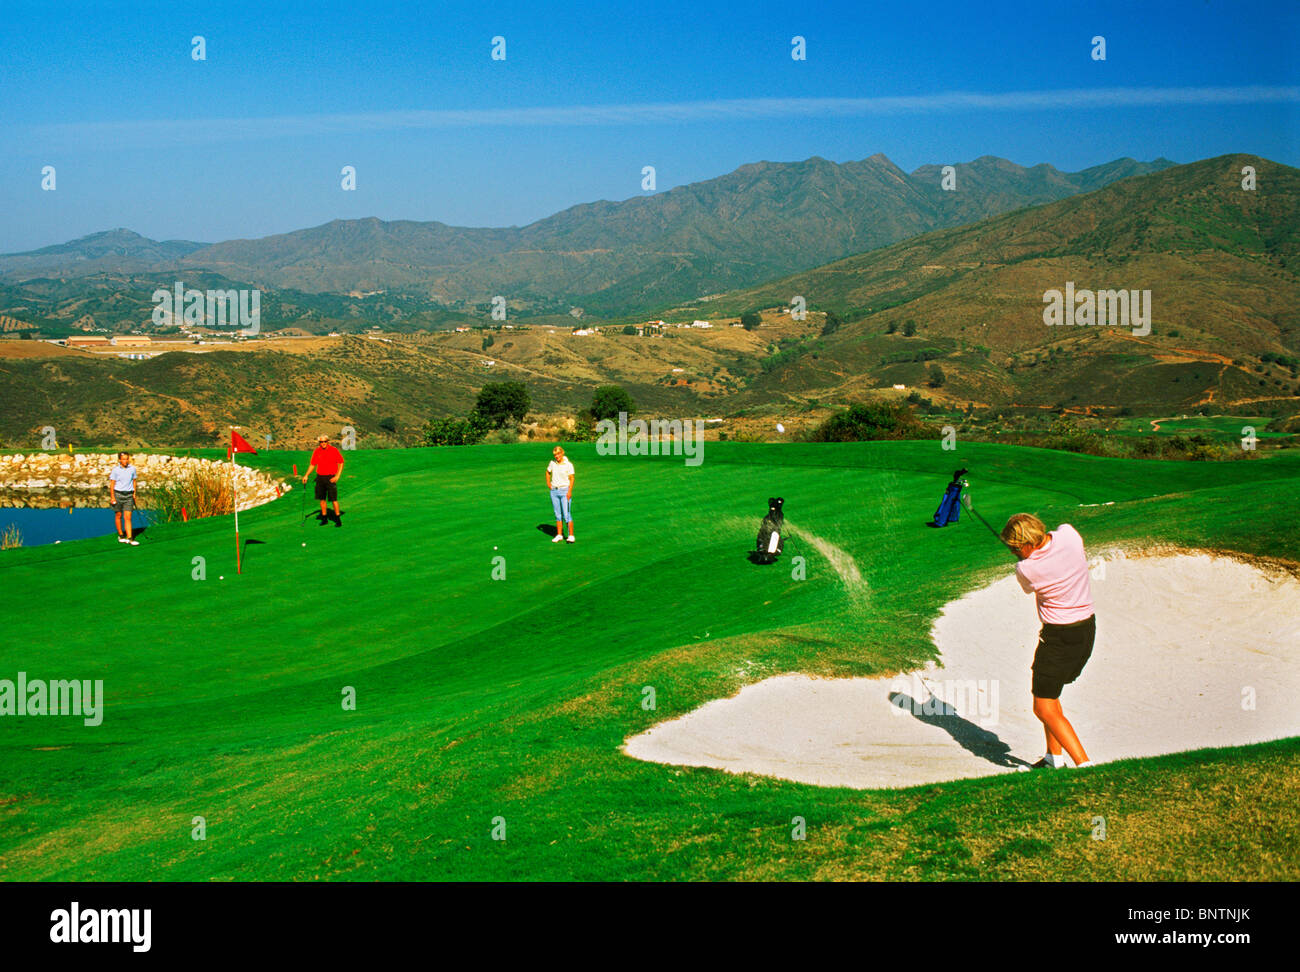 Golf course amid mountains, valleys and green fairways on north course at La  Cala Resort in Malaga on Costa del Sol, Spain Stock Photo - Alamy